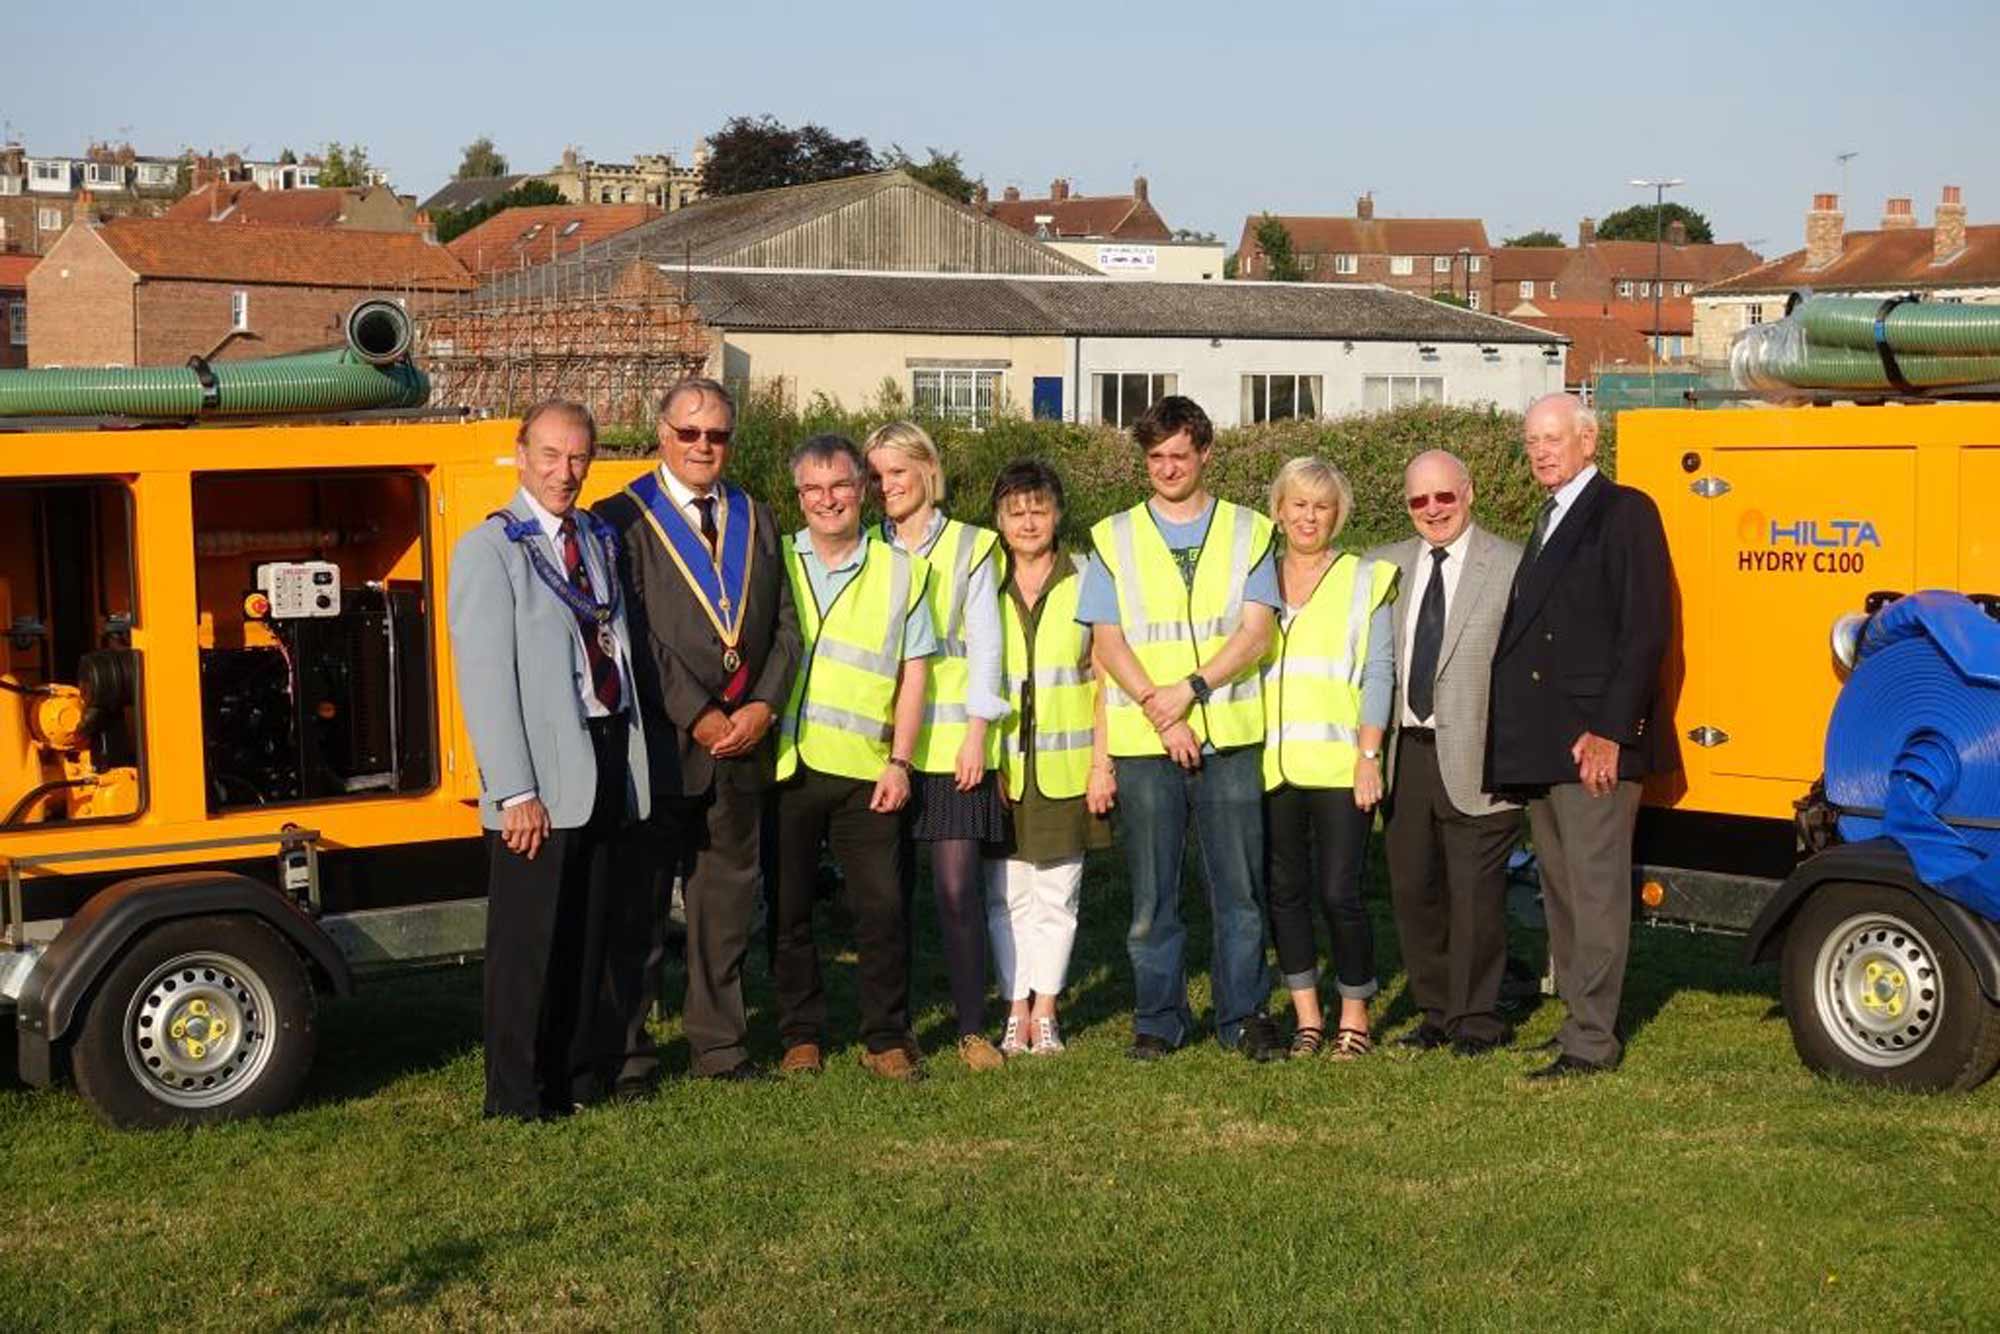 Pump It Up! Pictured with the two pumps funded by Freemasons from the Province of Yorkshire West Riding are Nicola Eades, co-ordinator; Carole Gill, volunteer; Jane Axwell, volunteer; David Bewley, co-ordinator; Russ Bewley, volunteer; Jack Pigott, Paul Clark, Assistant Provincial Grand Master; Peter Jestey, Master of Calcaria Lodge and Stuart Cadman